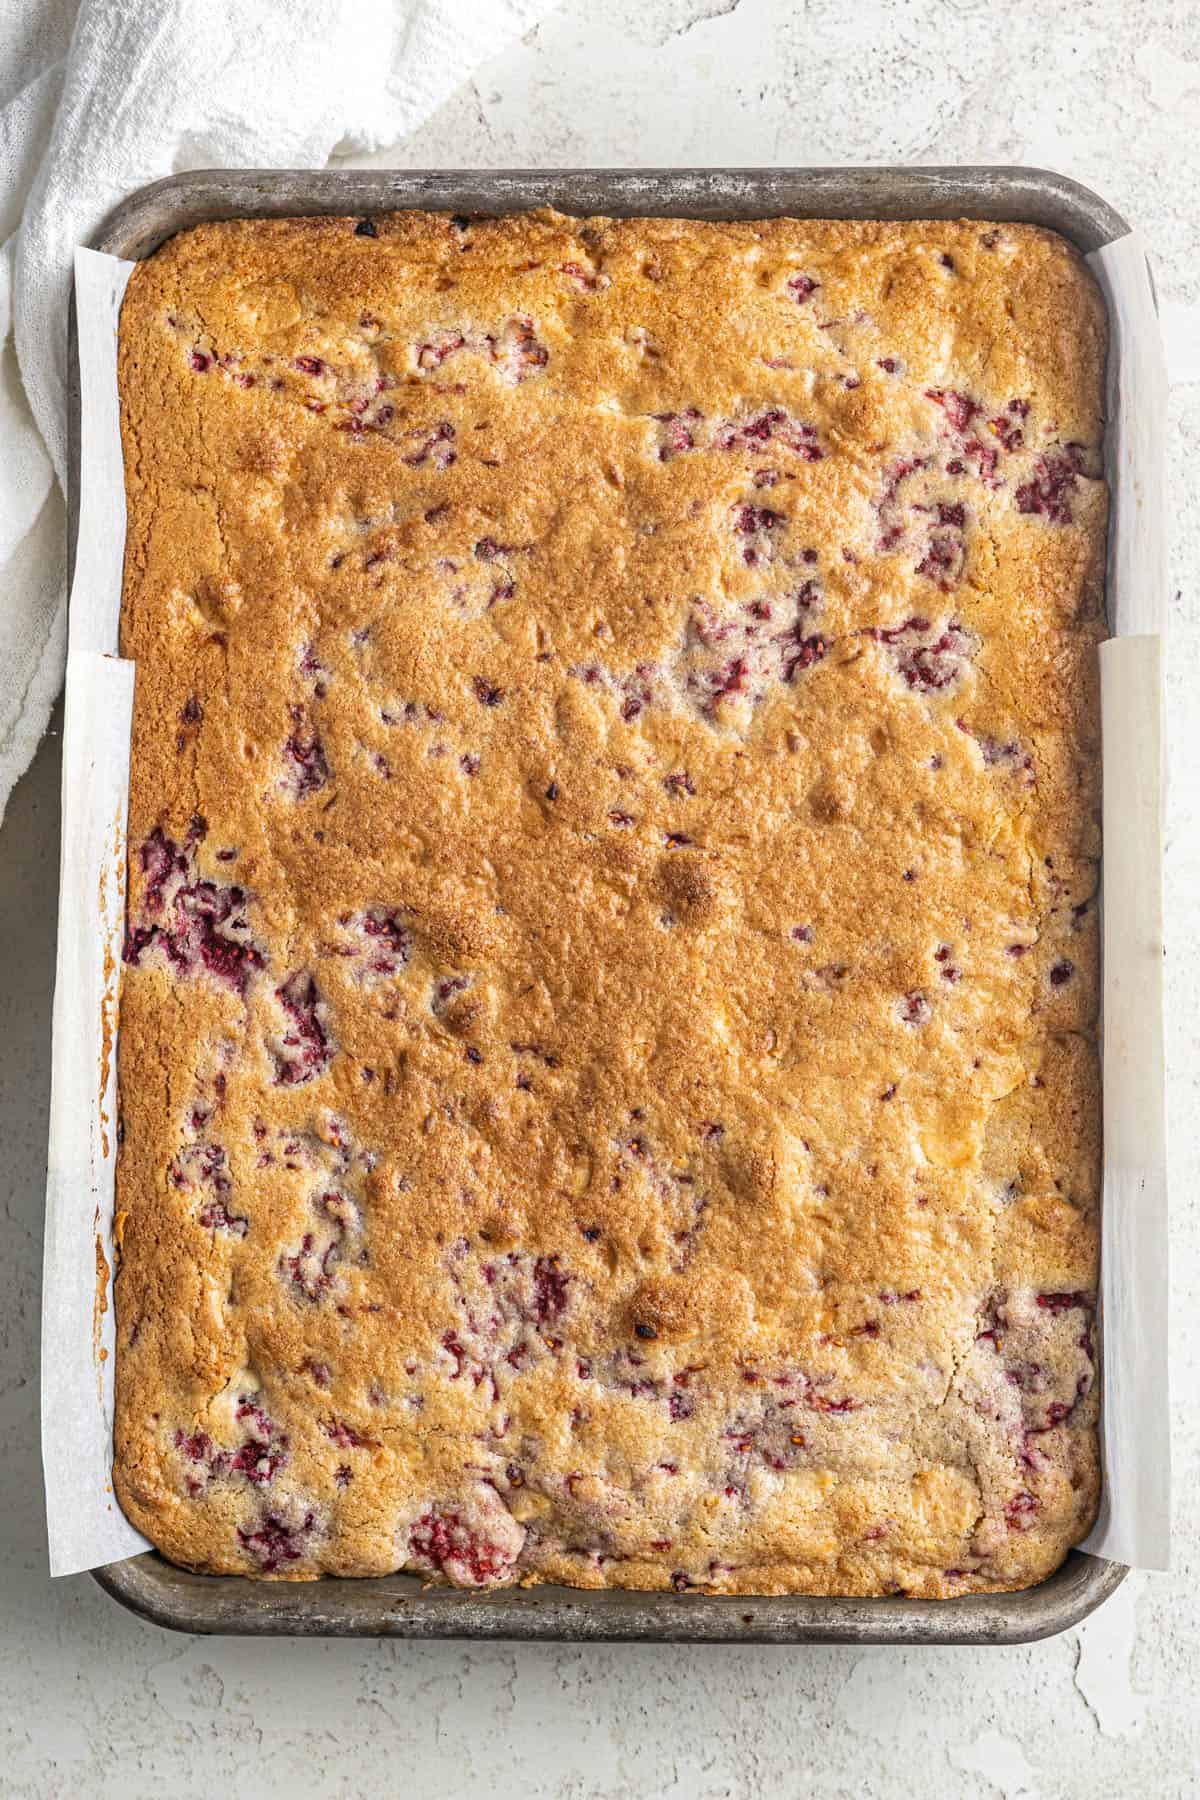 Image shows a finished stack of white chocolate raspberry blondies.